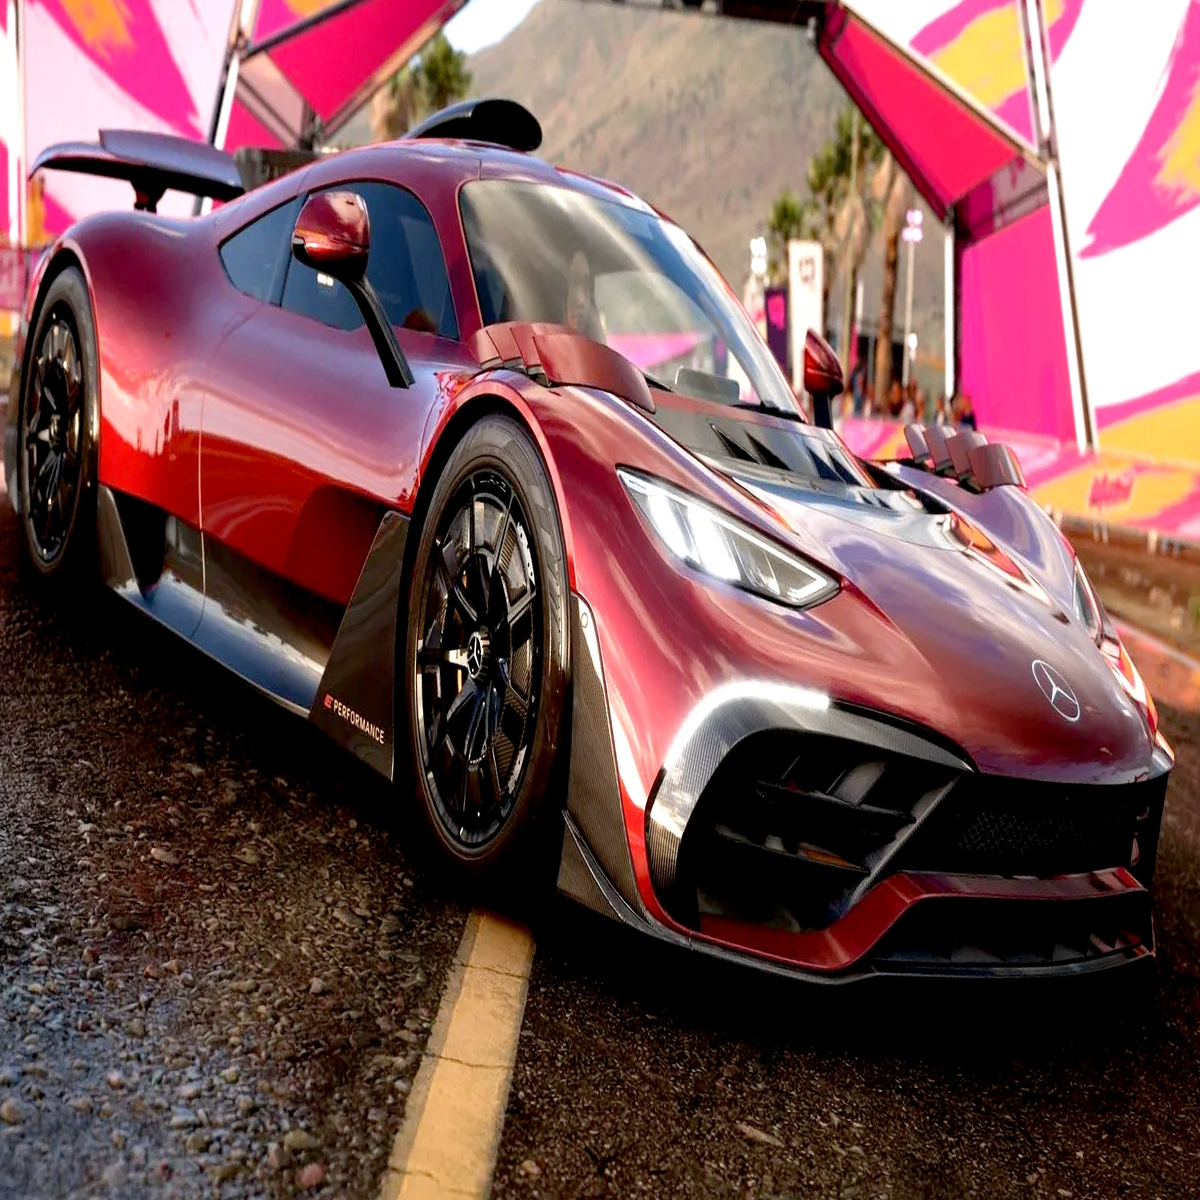 Driven around the bend - Forza Motorsport 5